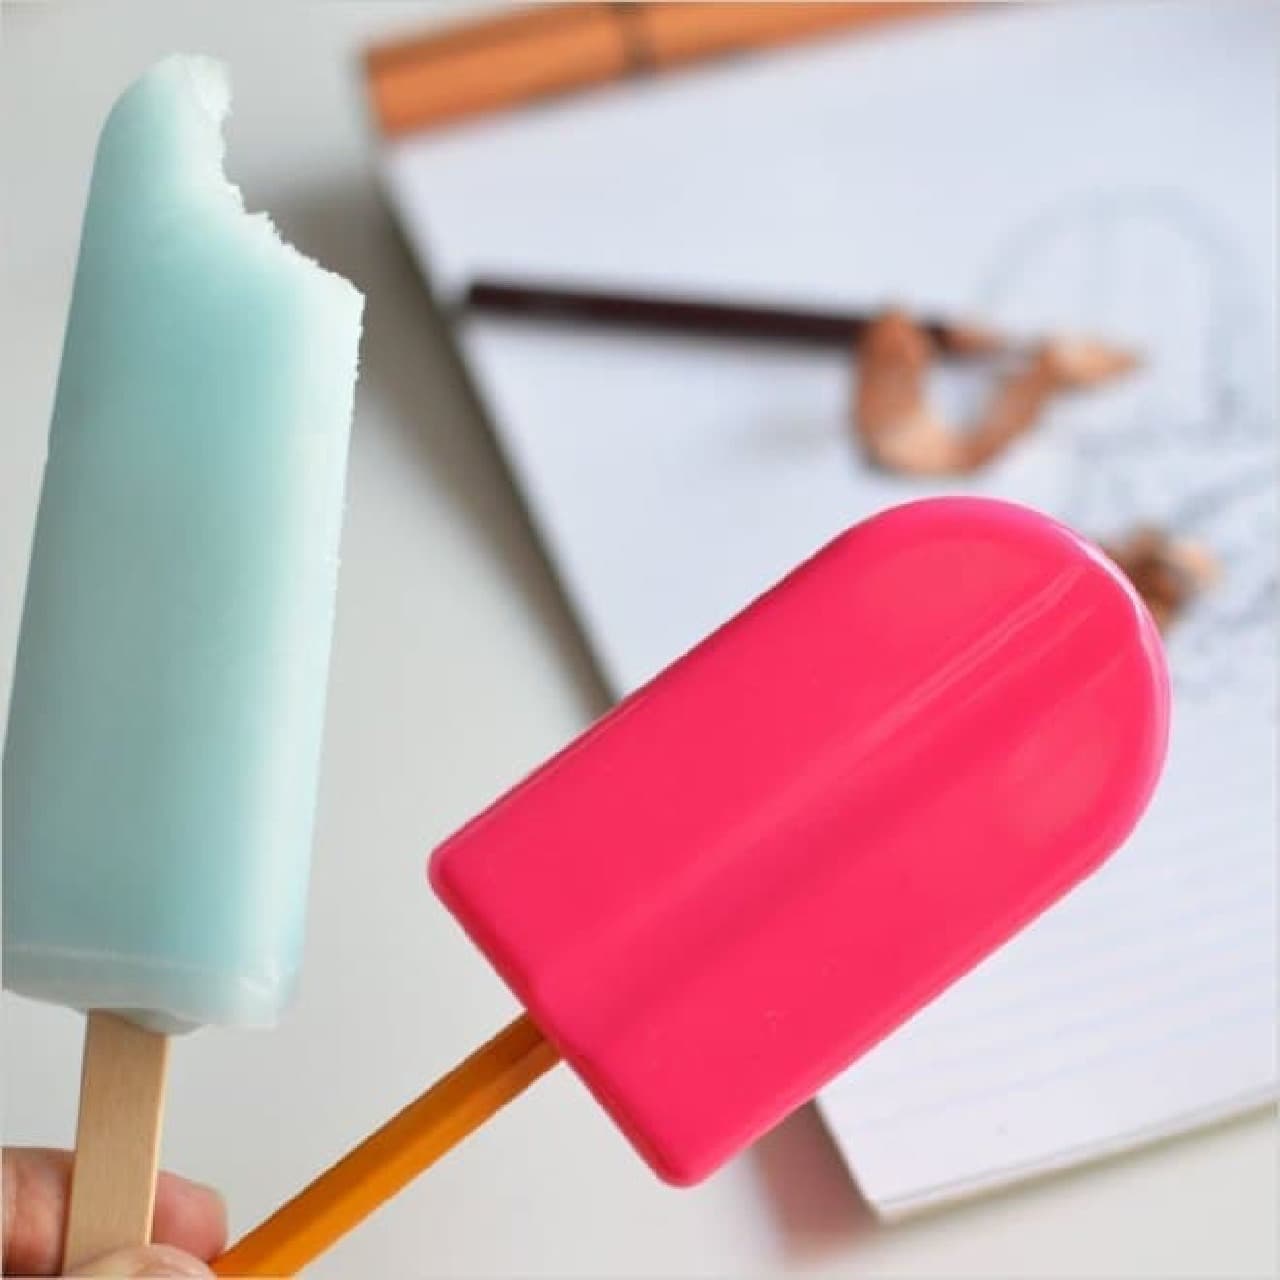 Feel cool even on hot days! "Ice candy pencil sharpener"